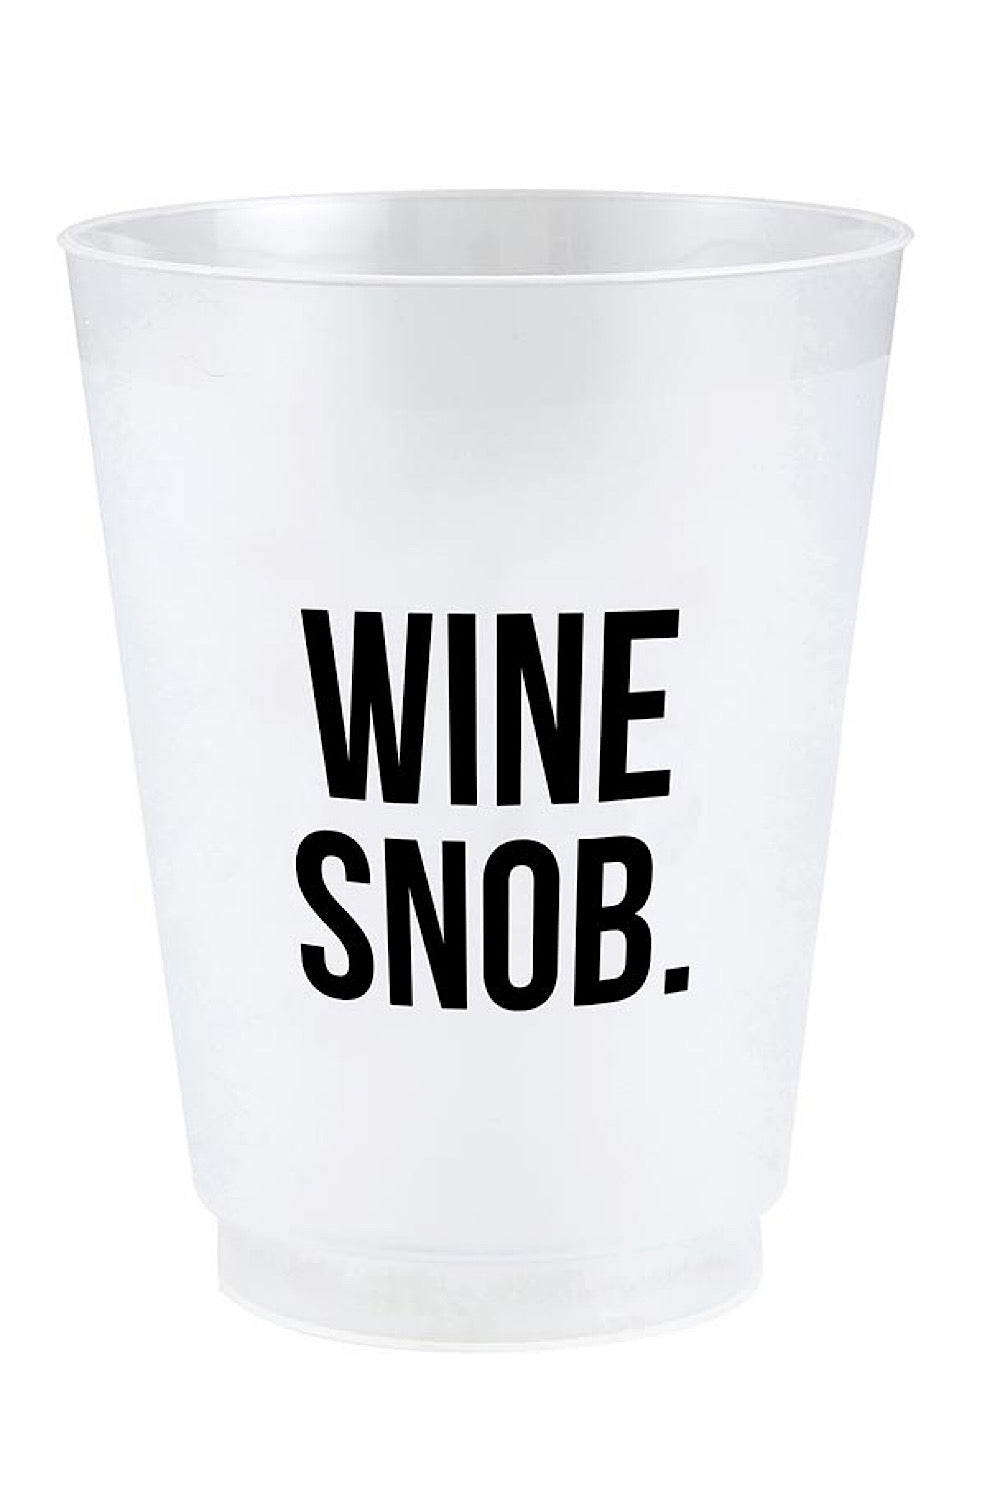 WINE SNOB FROST CUP SET OF 8